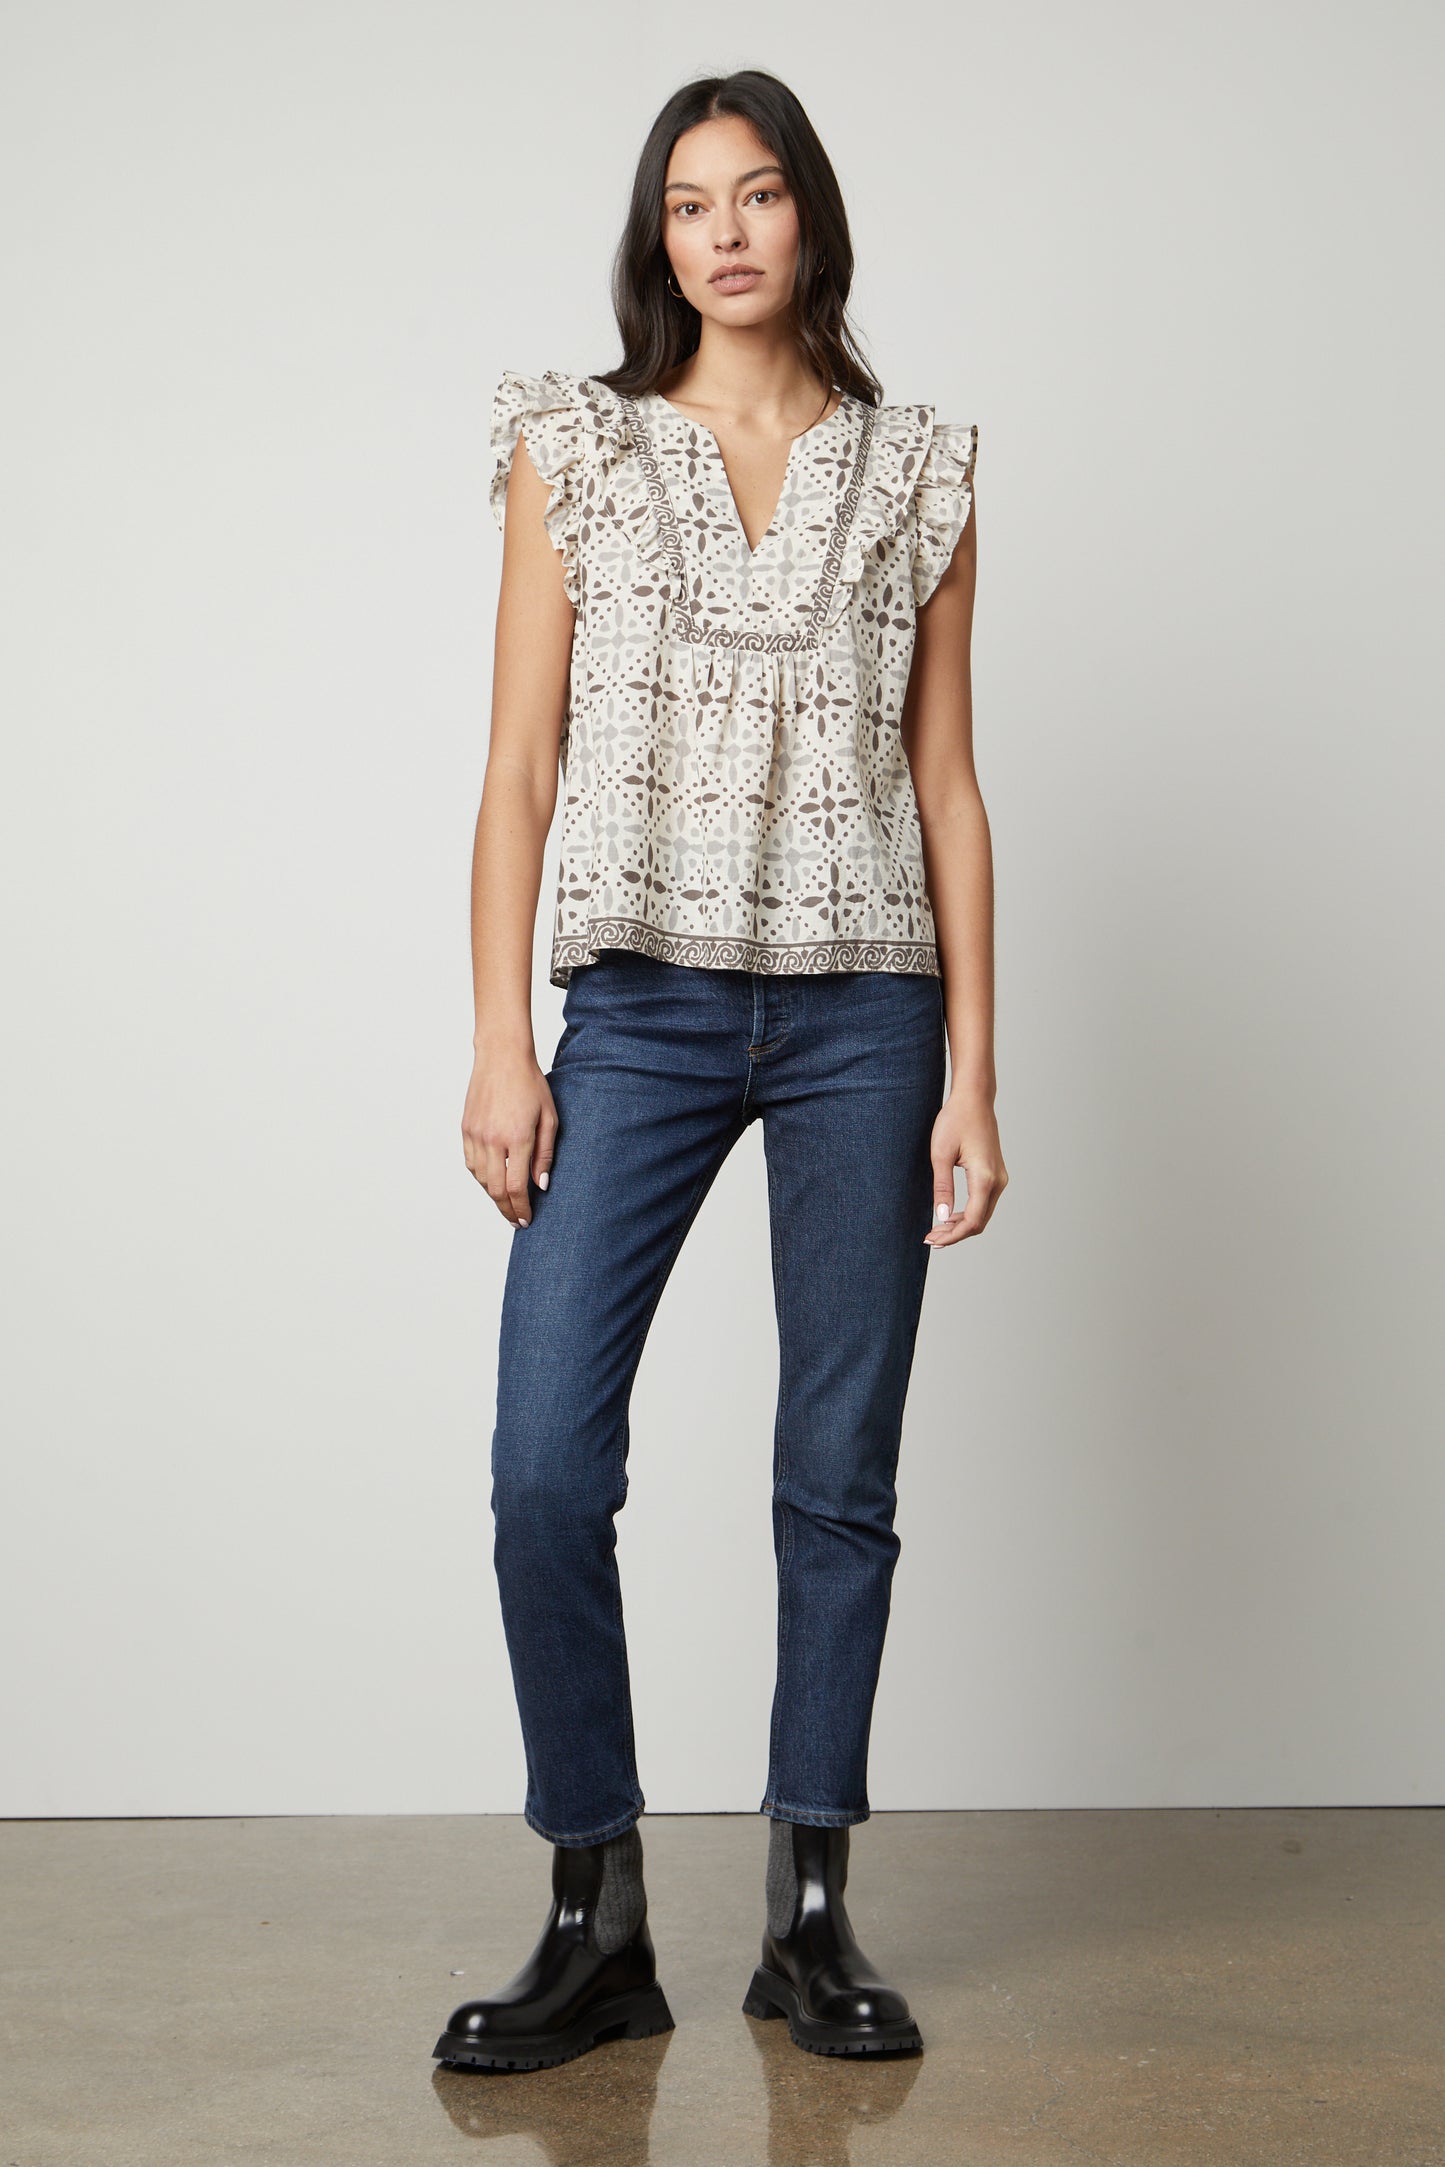 The model is wearing jeans and a CORIN PRINTED TANK TOP by Velvet by Graham & Spencer with ruffled sleeves.-26727056179393